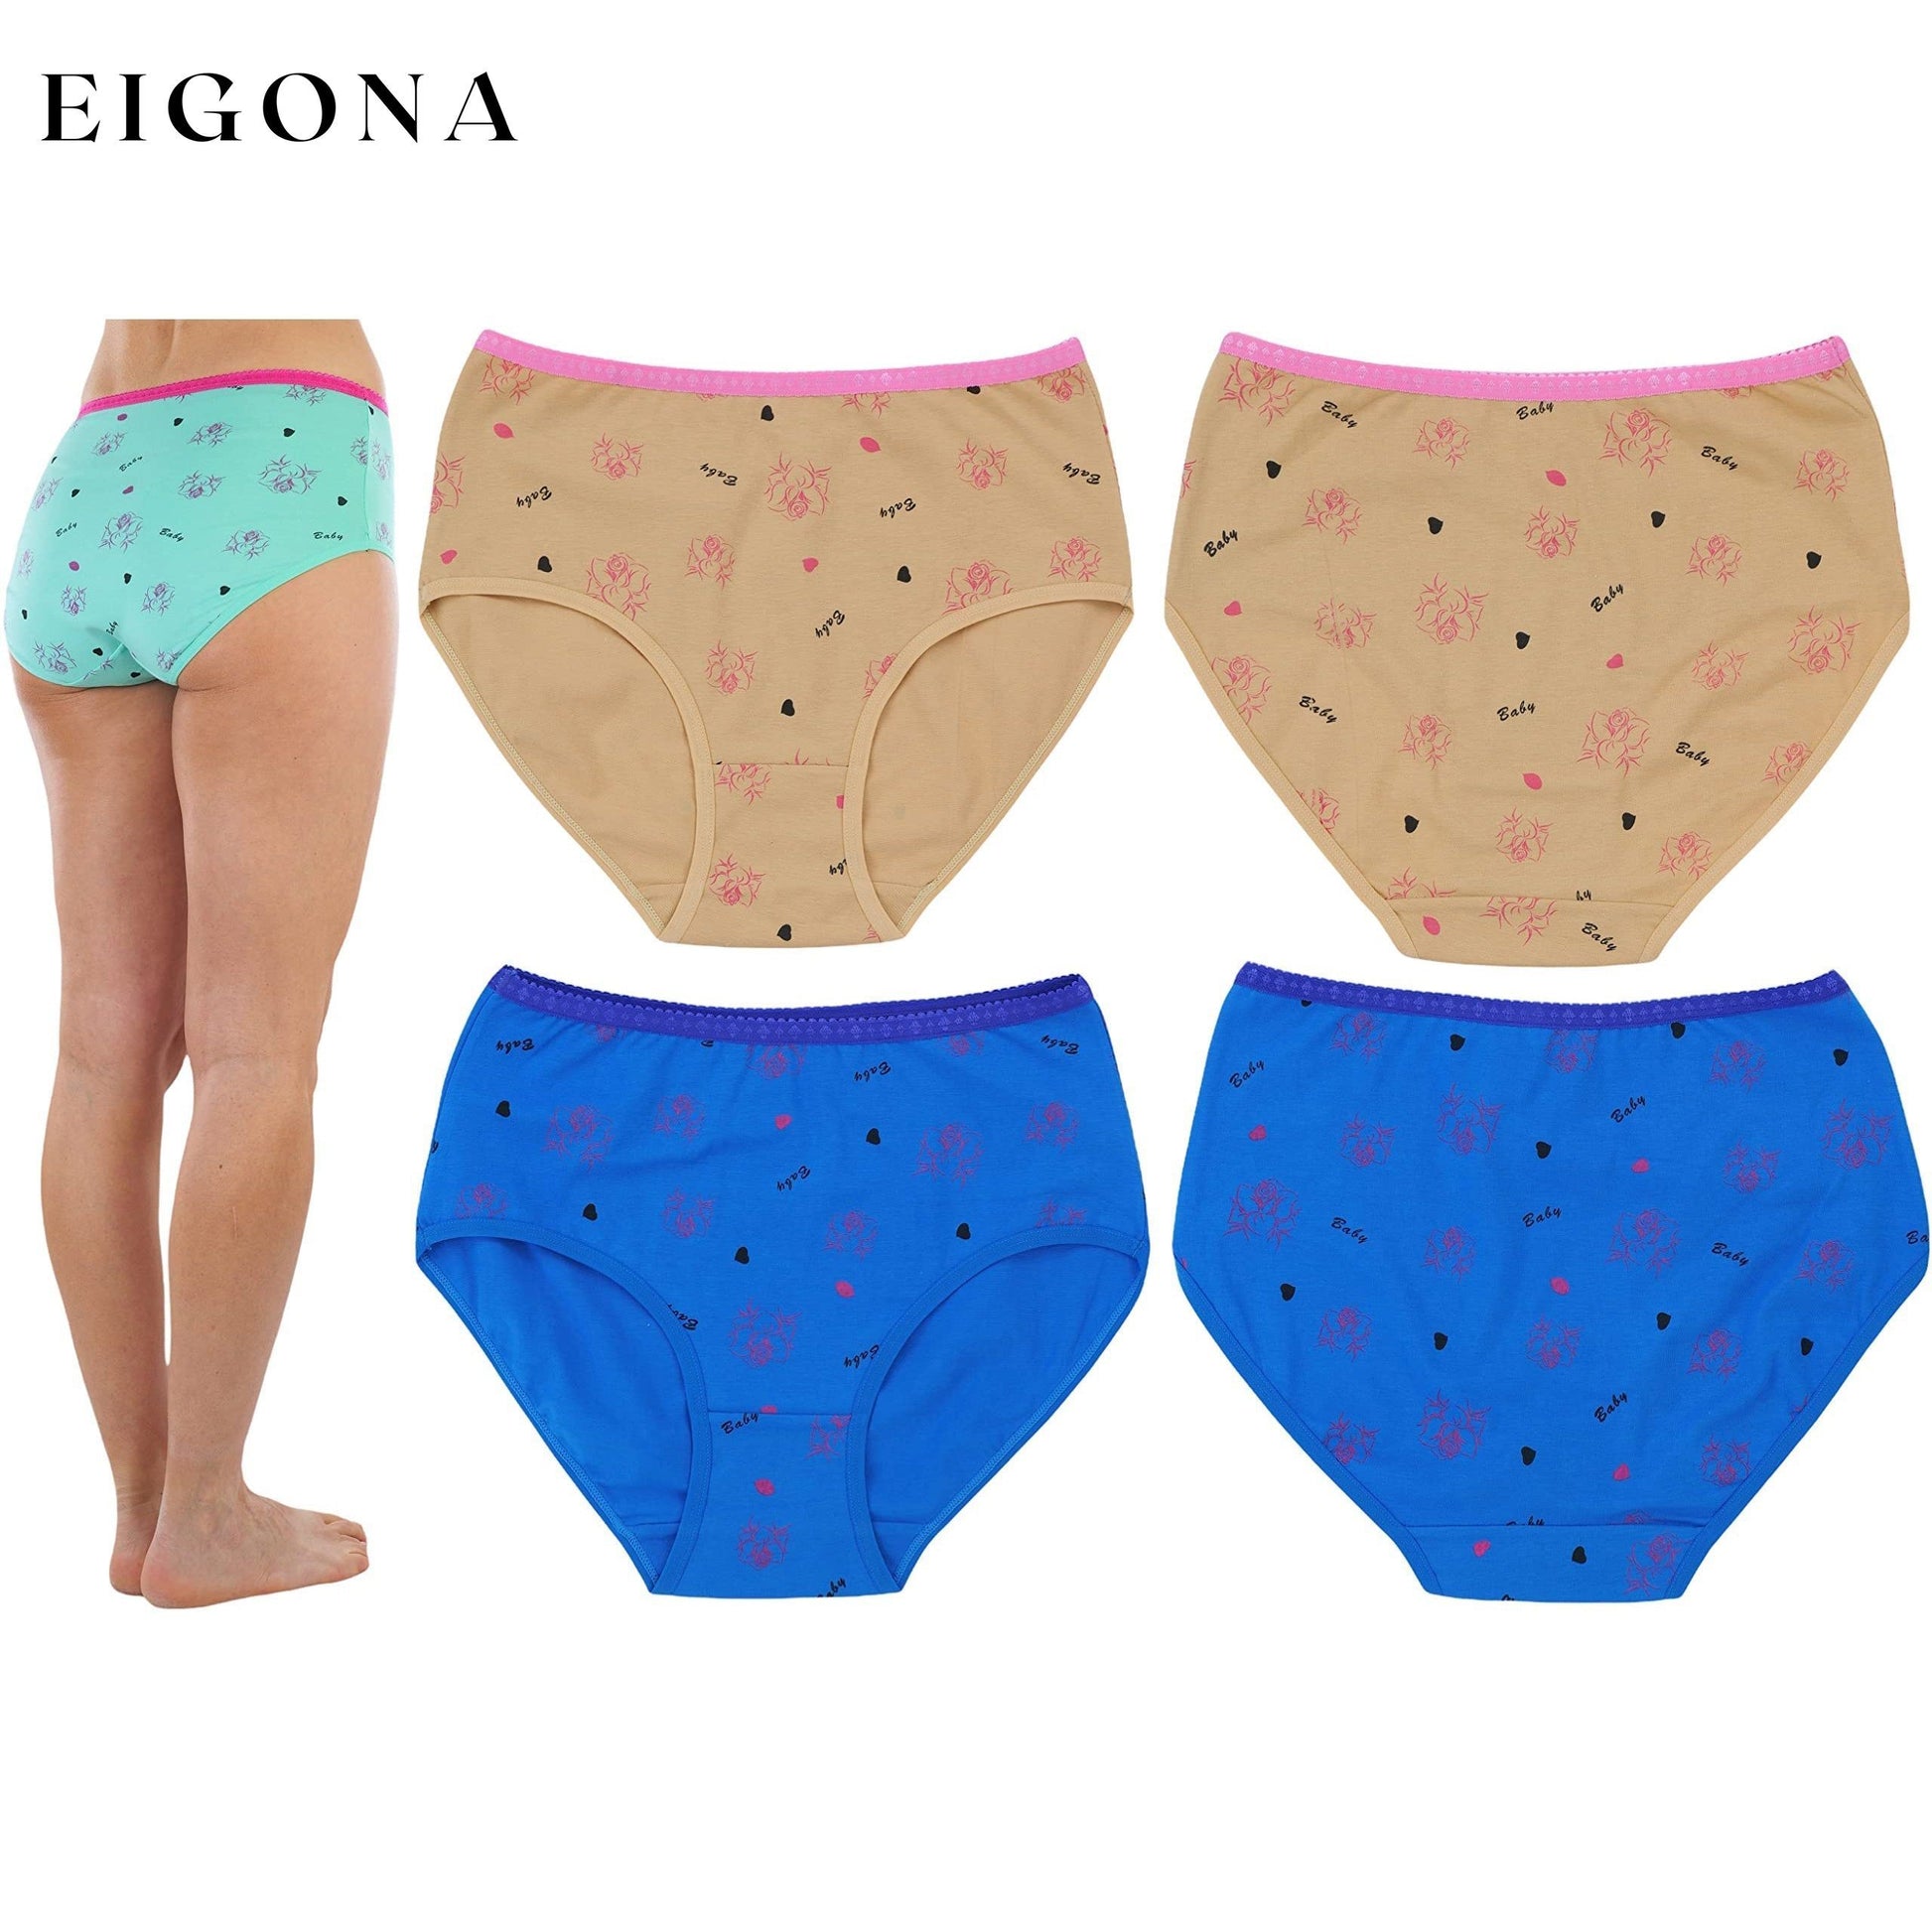 6-Pack: Women's High Waisted Vibrant Assortment with Rose and Baby Design Gridle Panties __stock:100 lingerie refund_fee:1200